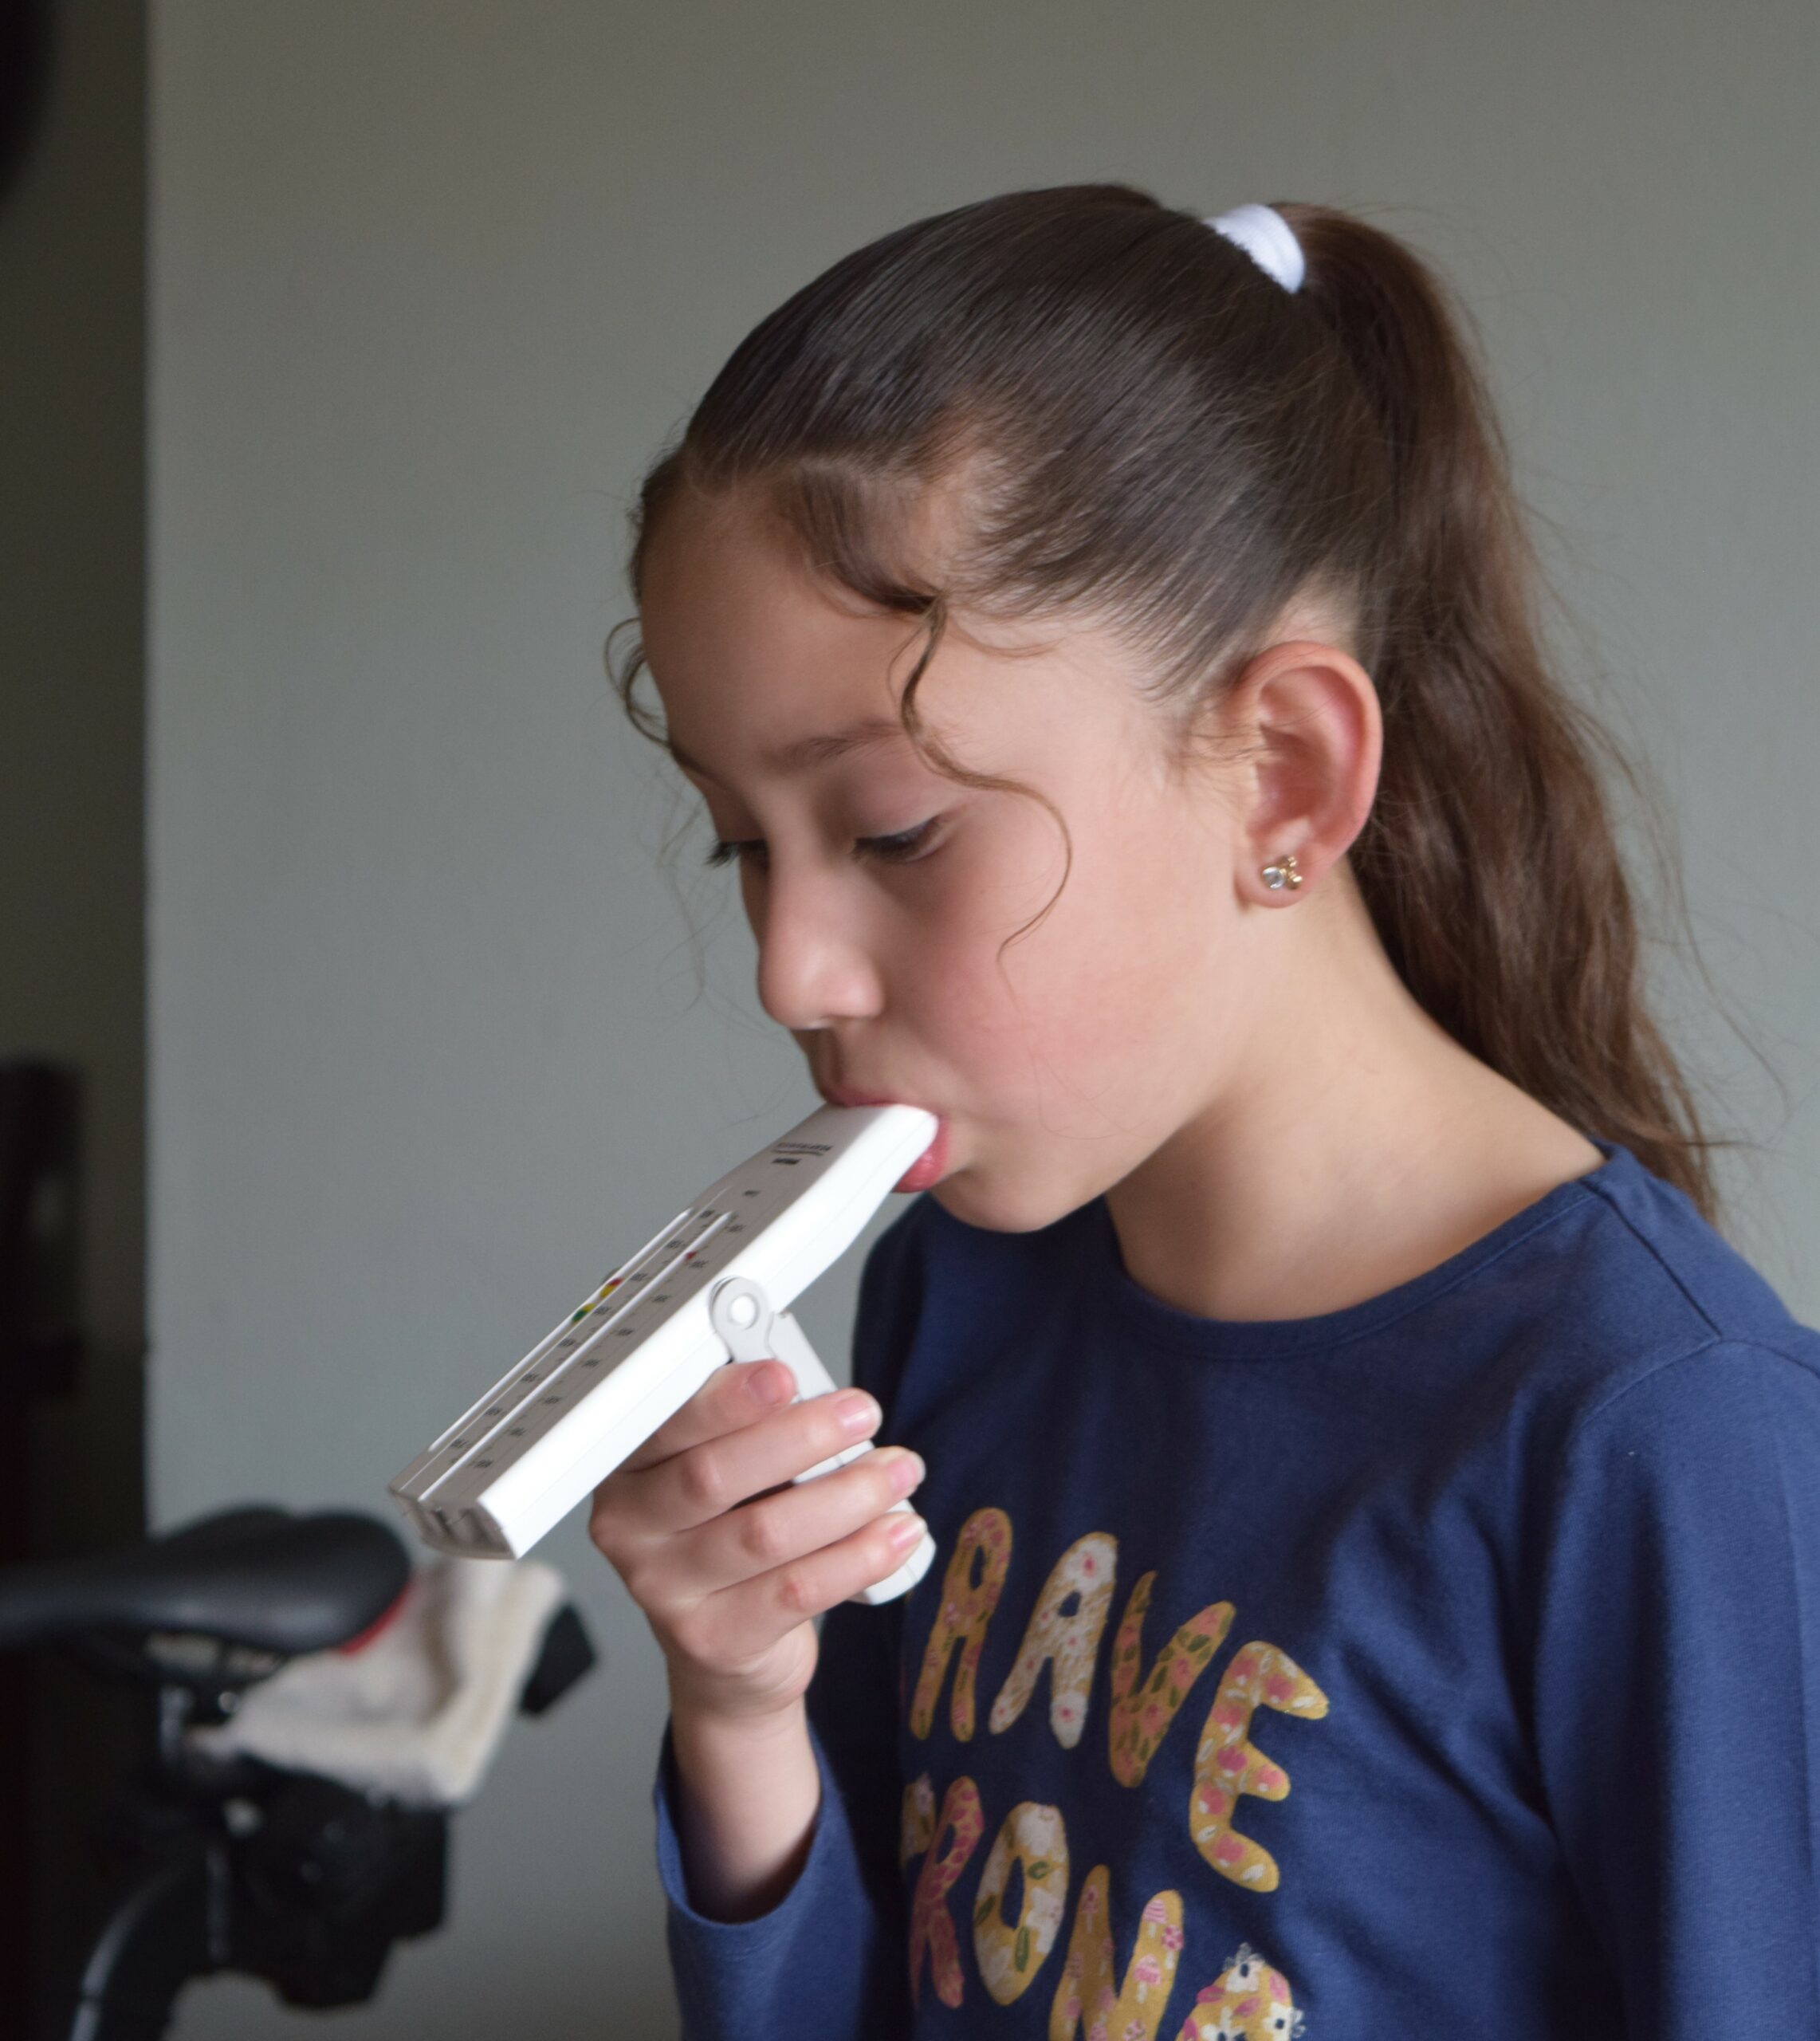 Pictured: A young girl named Melanie is pictured in a blue shirt and using a white peak flow meter. The background shows a bicycle seat and a grey wall.